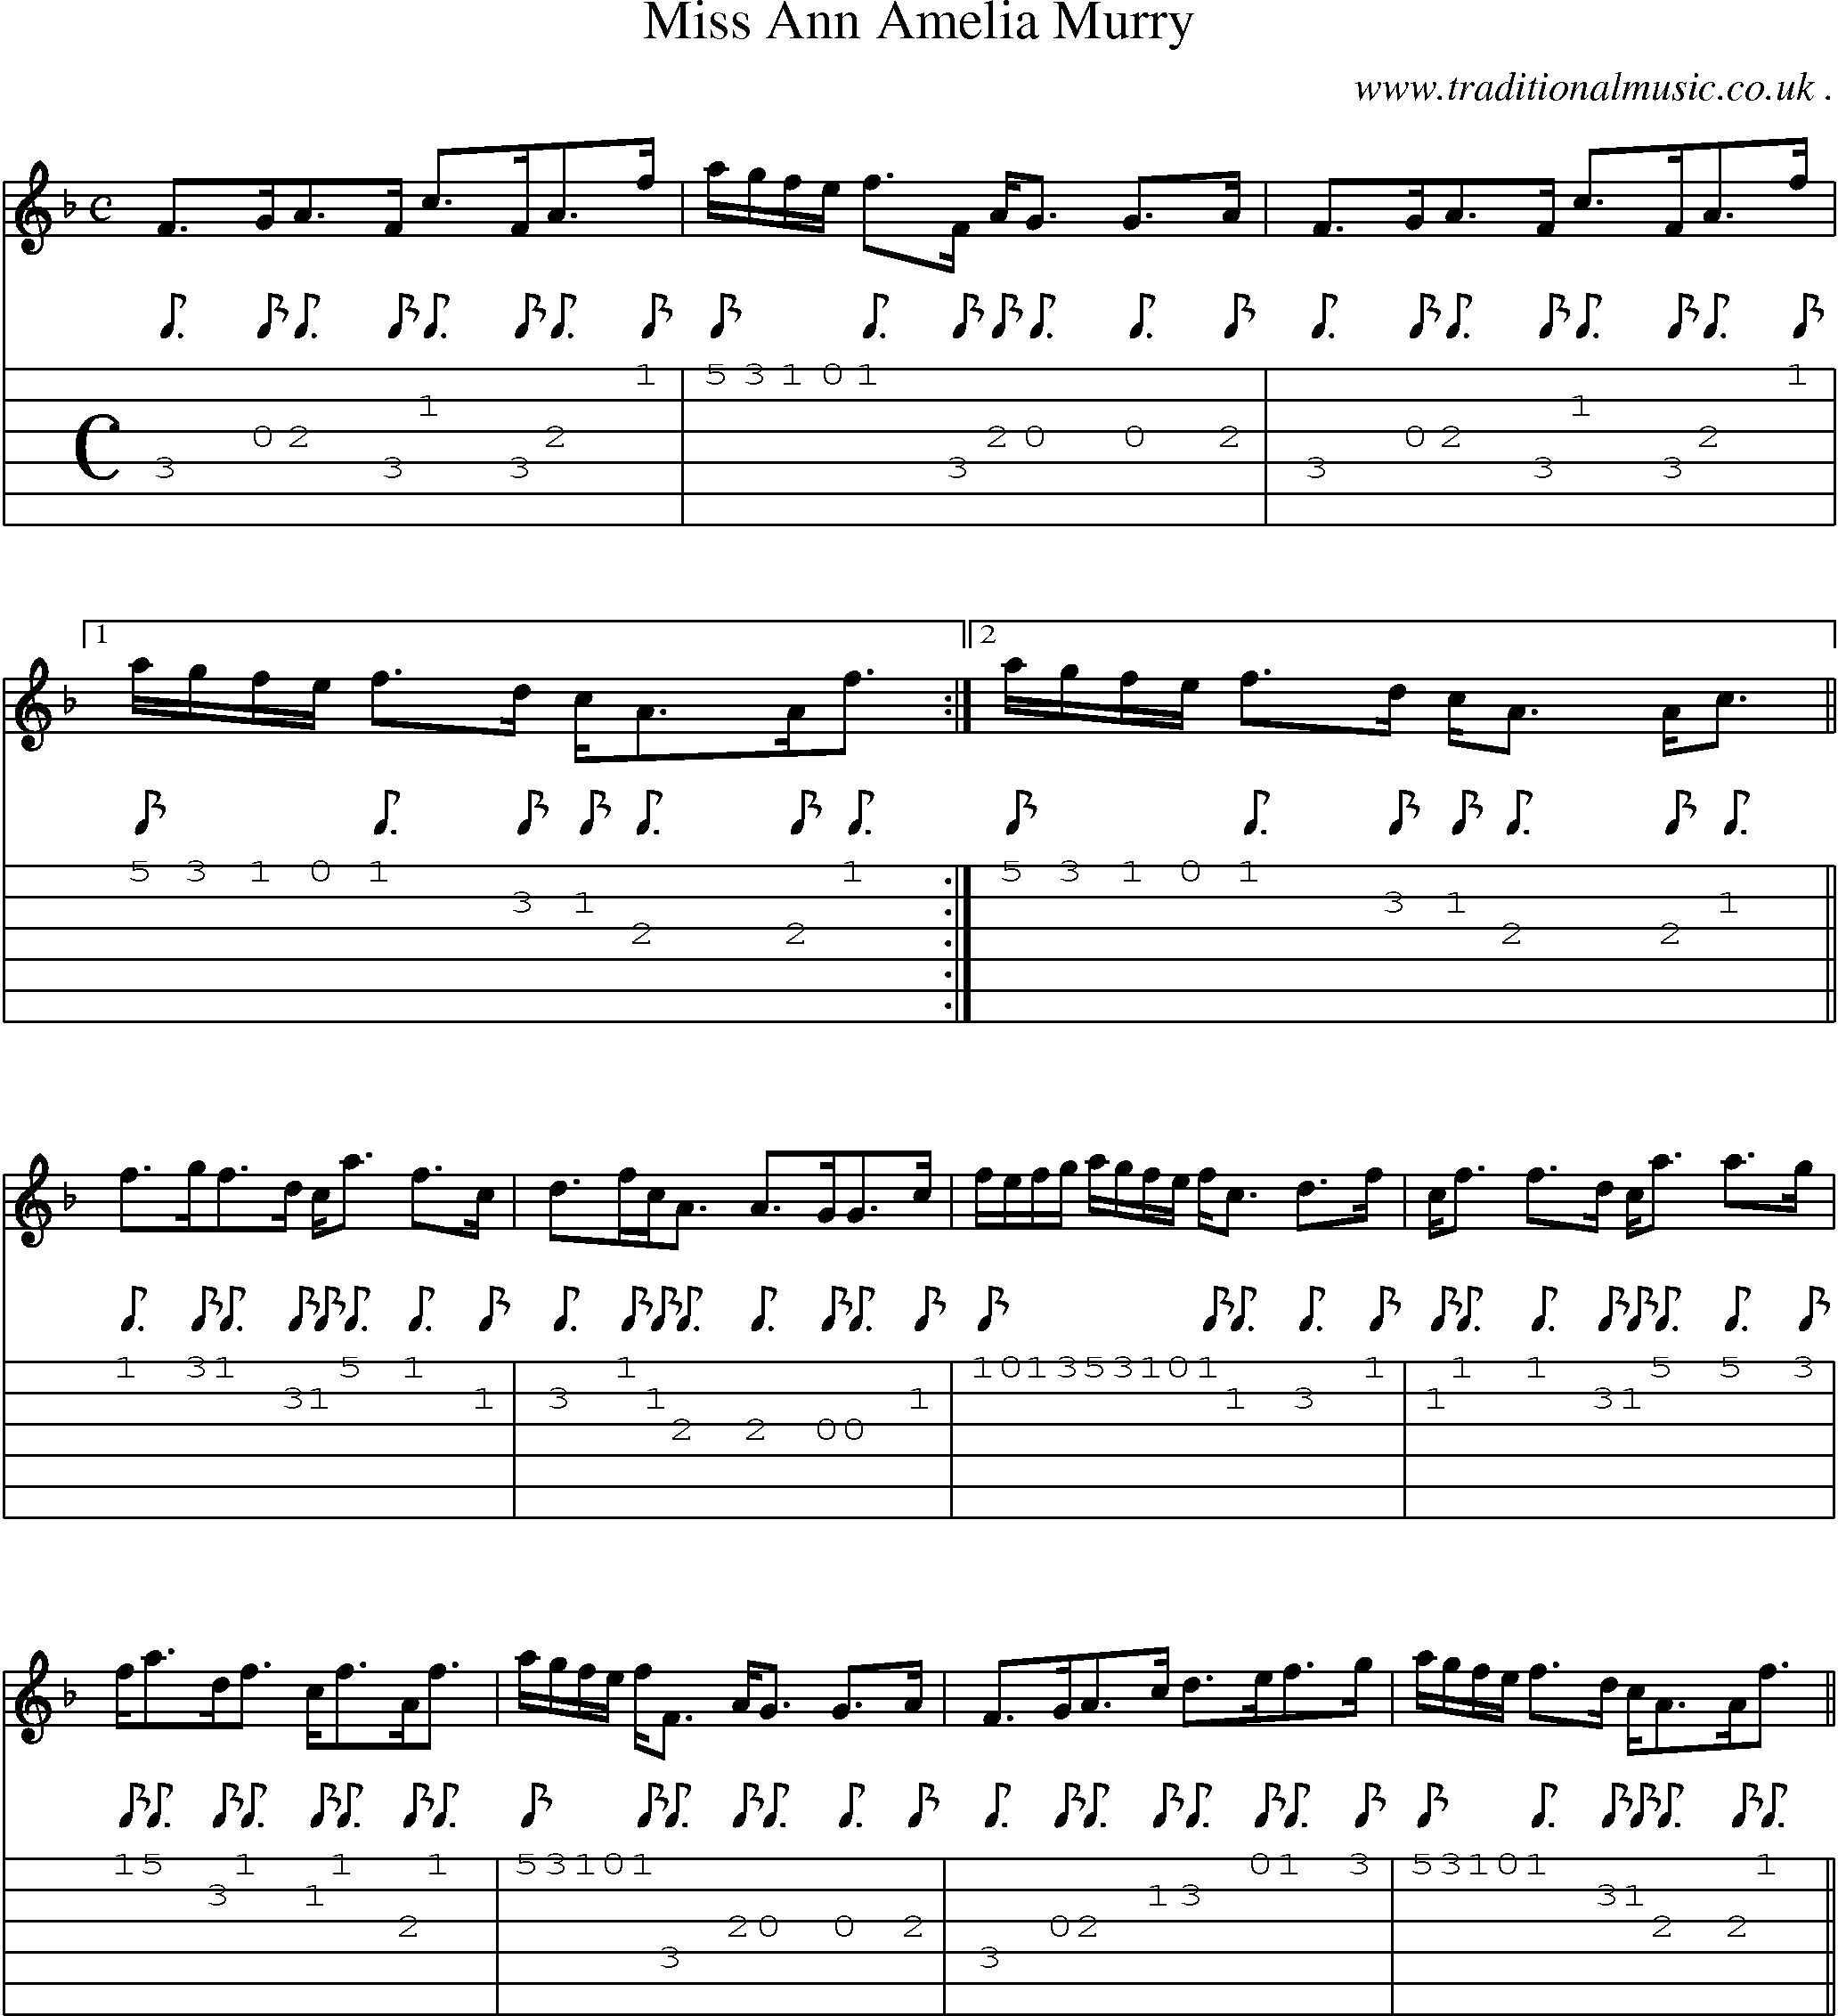 Sheet-music  score, Chords and Guitar Tabs for Miss Ann Amelia Murry